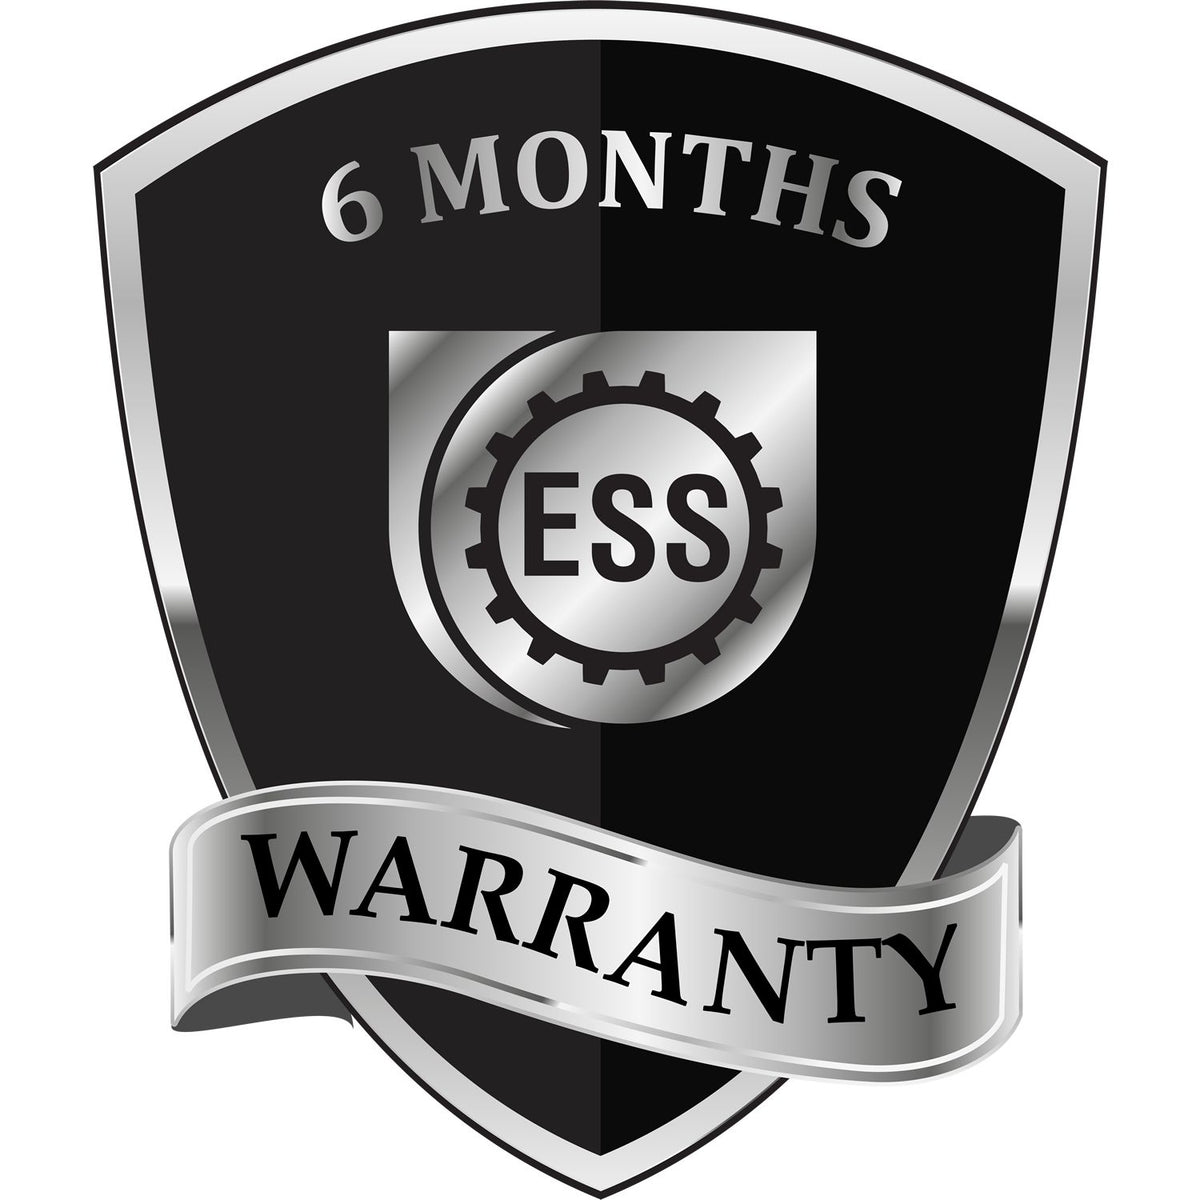 A black and silver badge or emblem showing warranty information for the Illinois Professional Geologist Seal Stamp